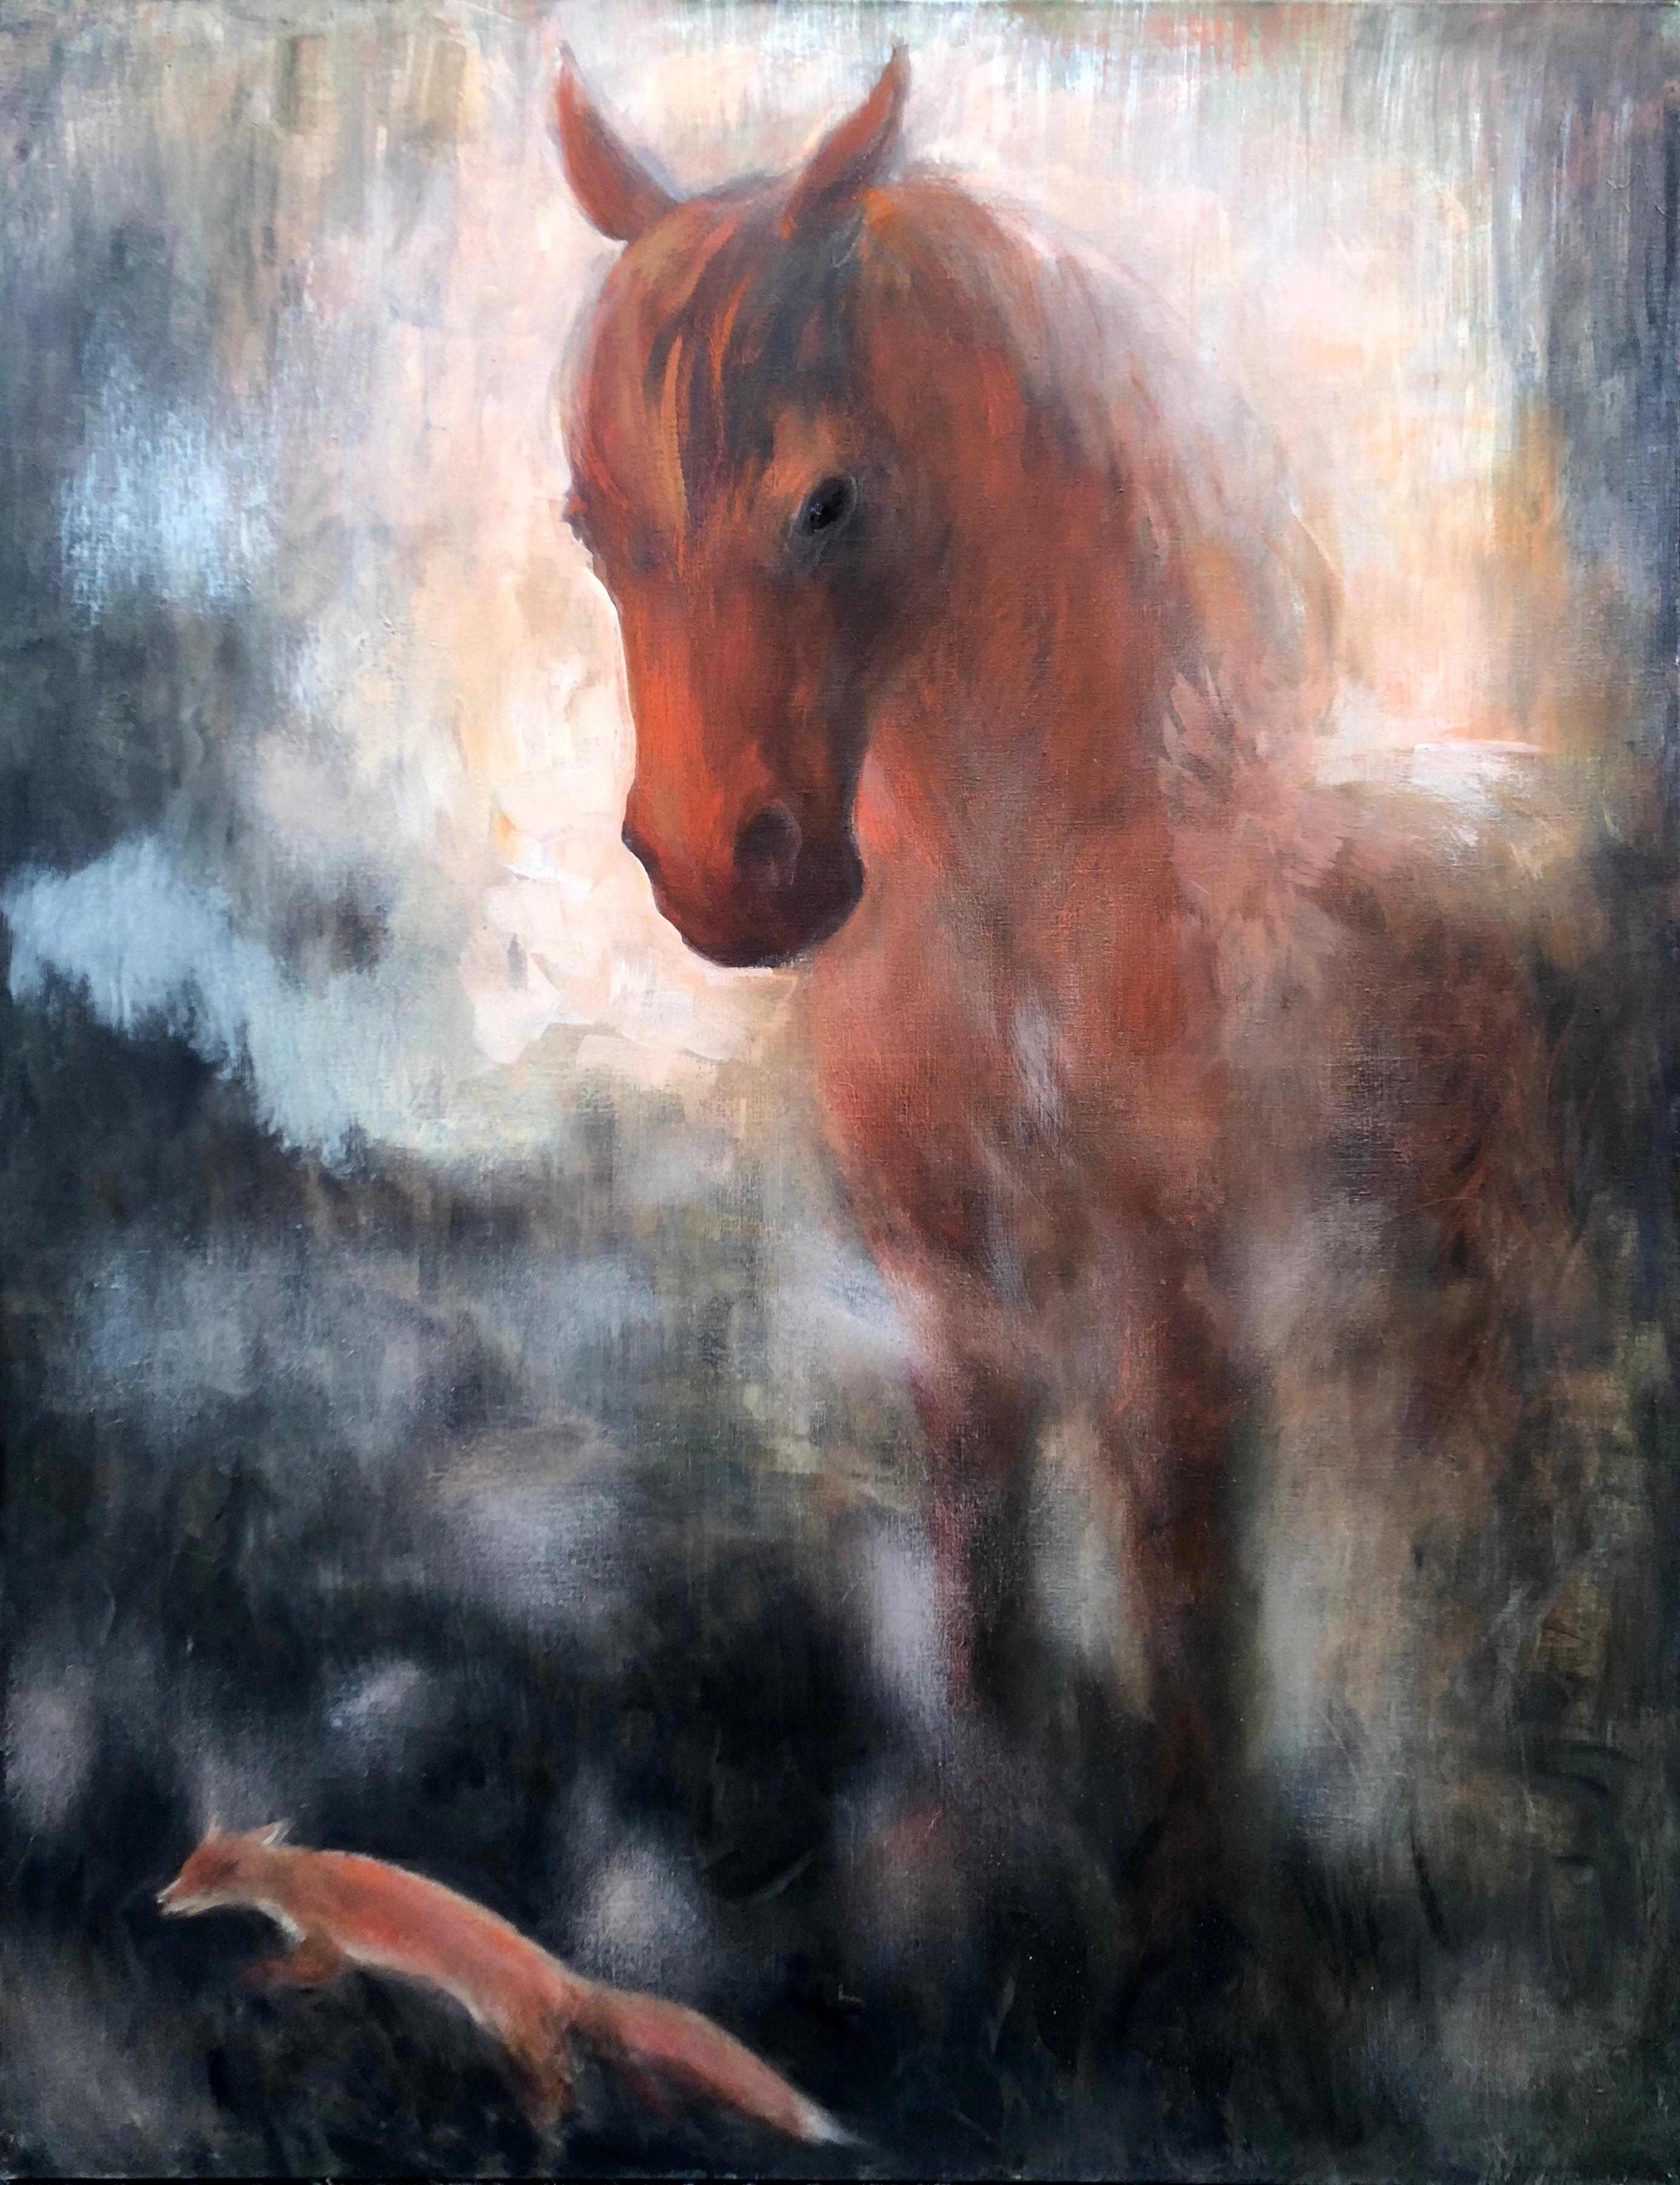 Horse and fox painting on canvas London by Volodymyr Zayichenko
2018
Unique painting on canvas is guaranteed to be included in a Catalogue Raisonne and provided with a blockchain based Certificate of Authenticity. Available in cryptocurrencies: